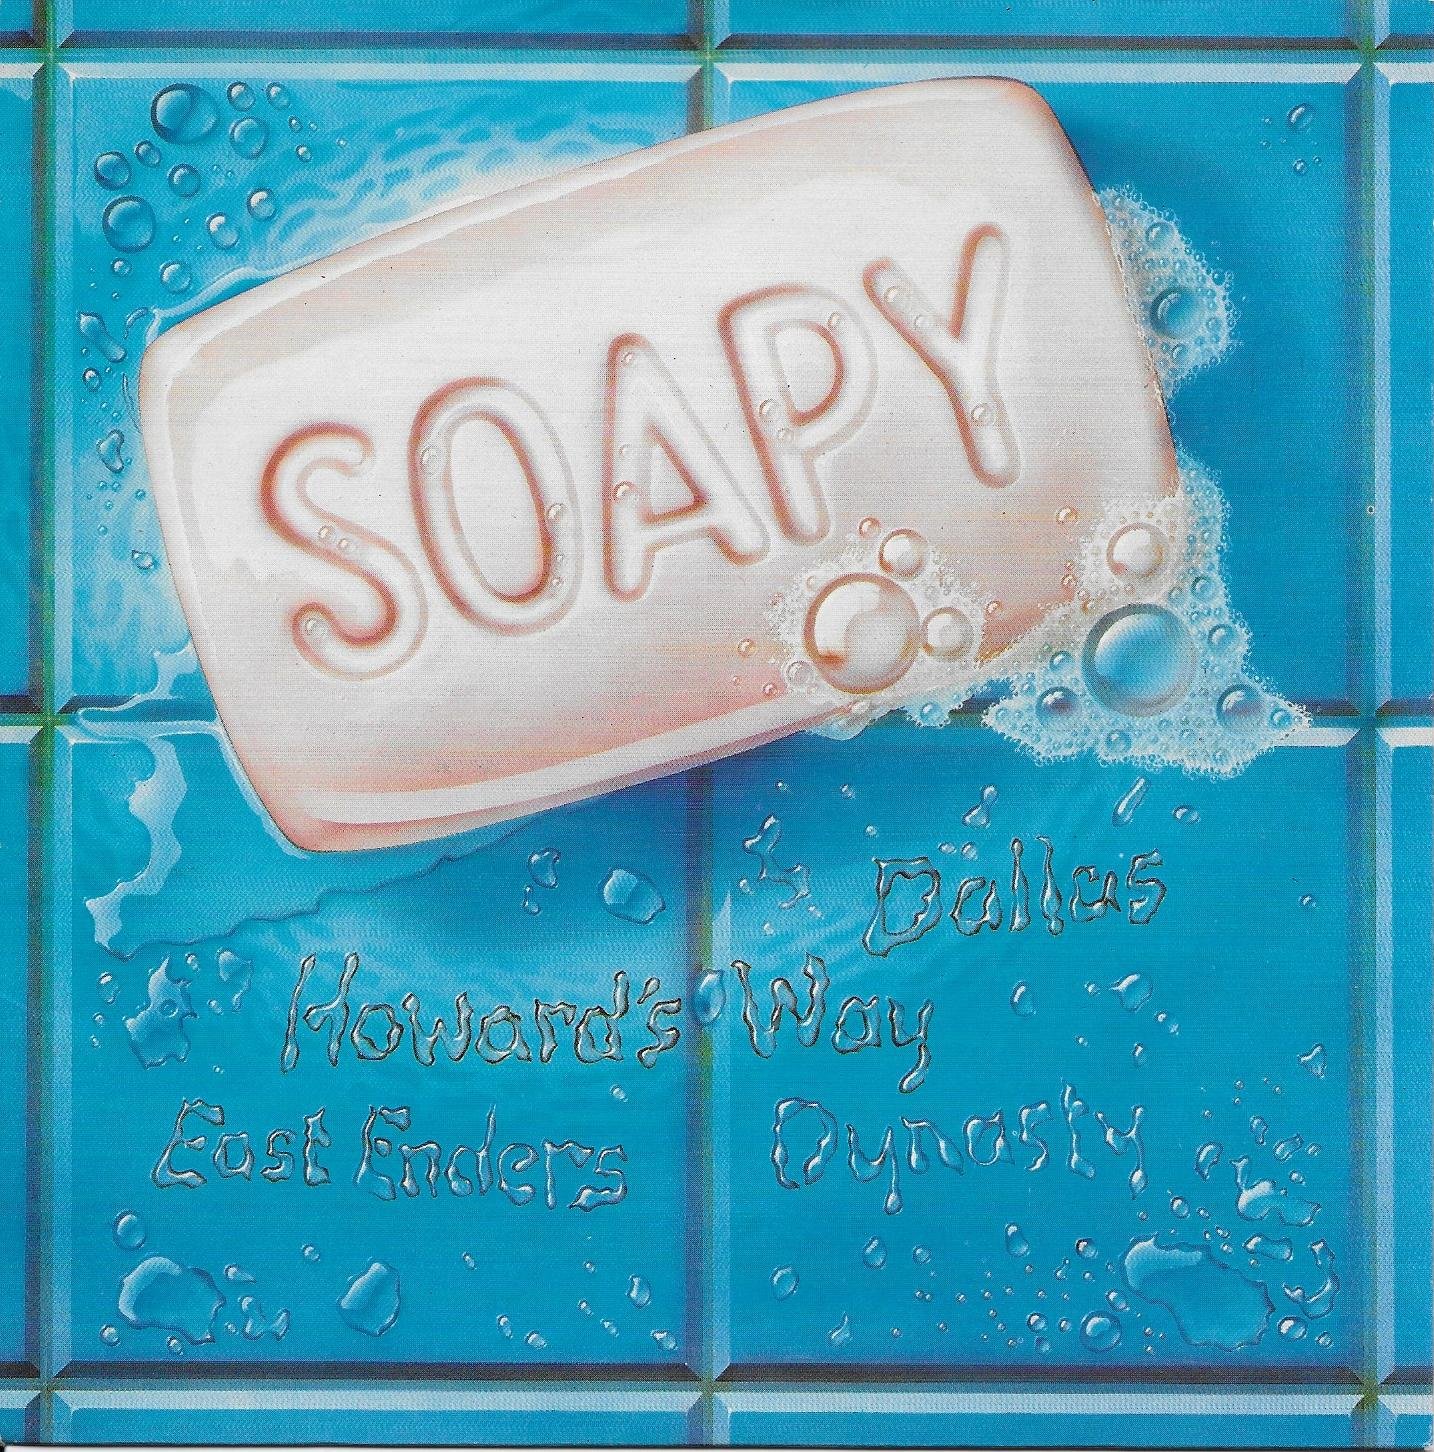 Picture of RESL 206 Soapy by artist Alan Coulthard / Top of the Box